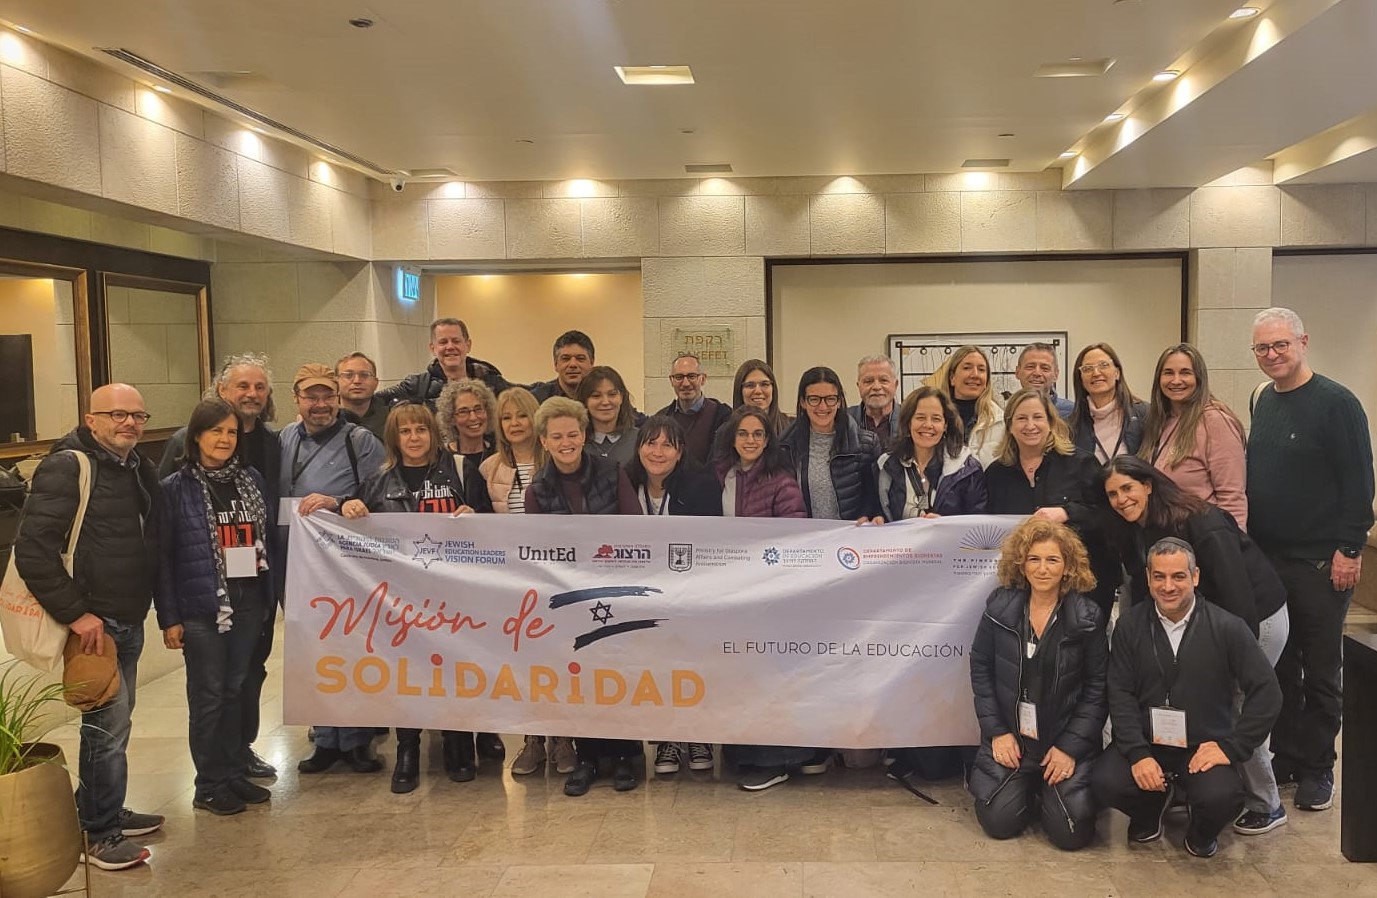 ZIONIST AND SOLIDARITY EDUCATIONAL MISSION TO ISRAEL